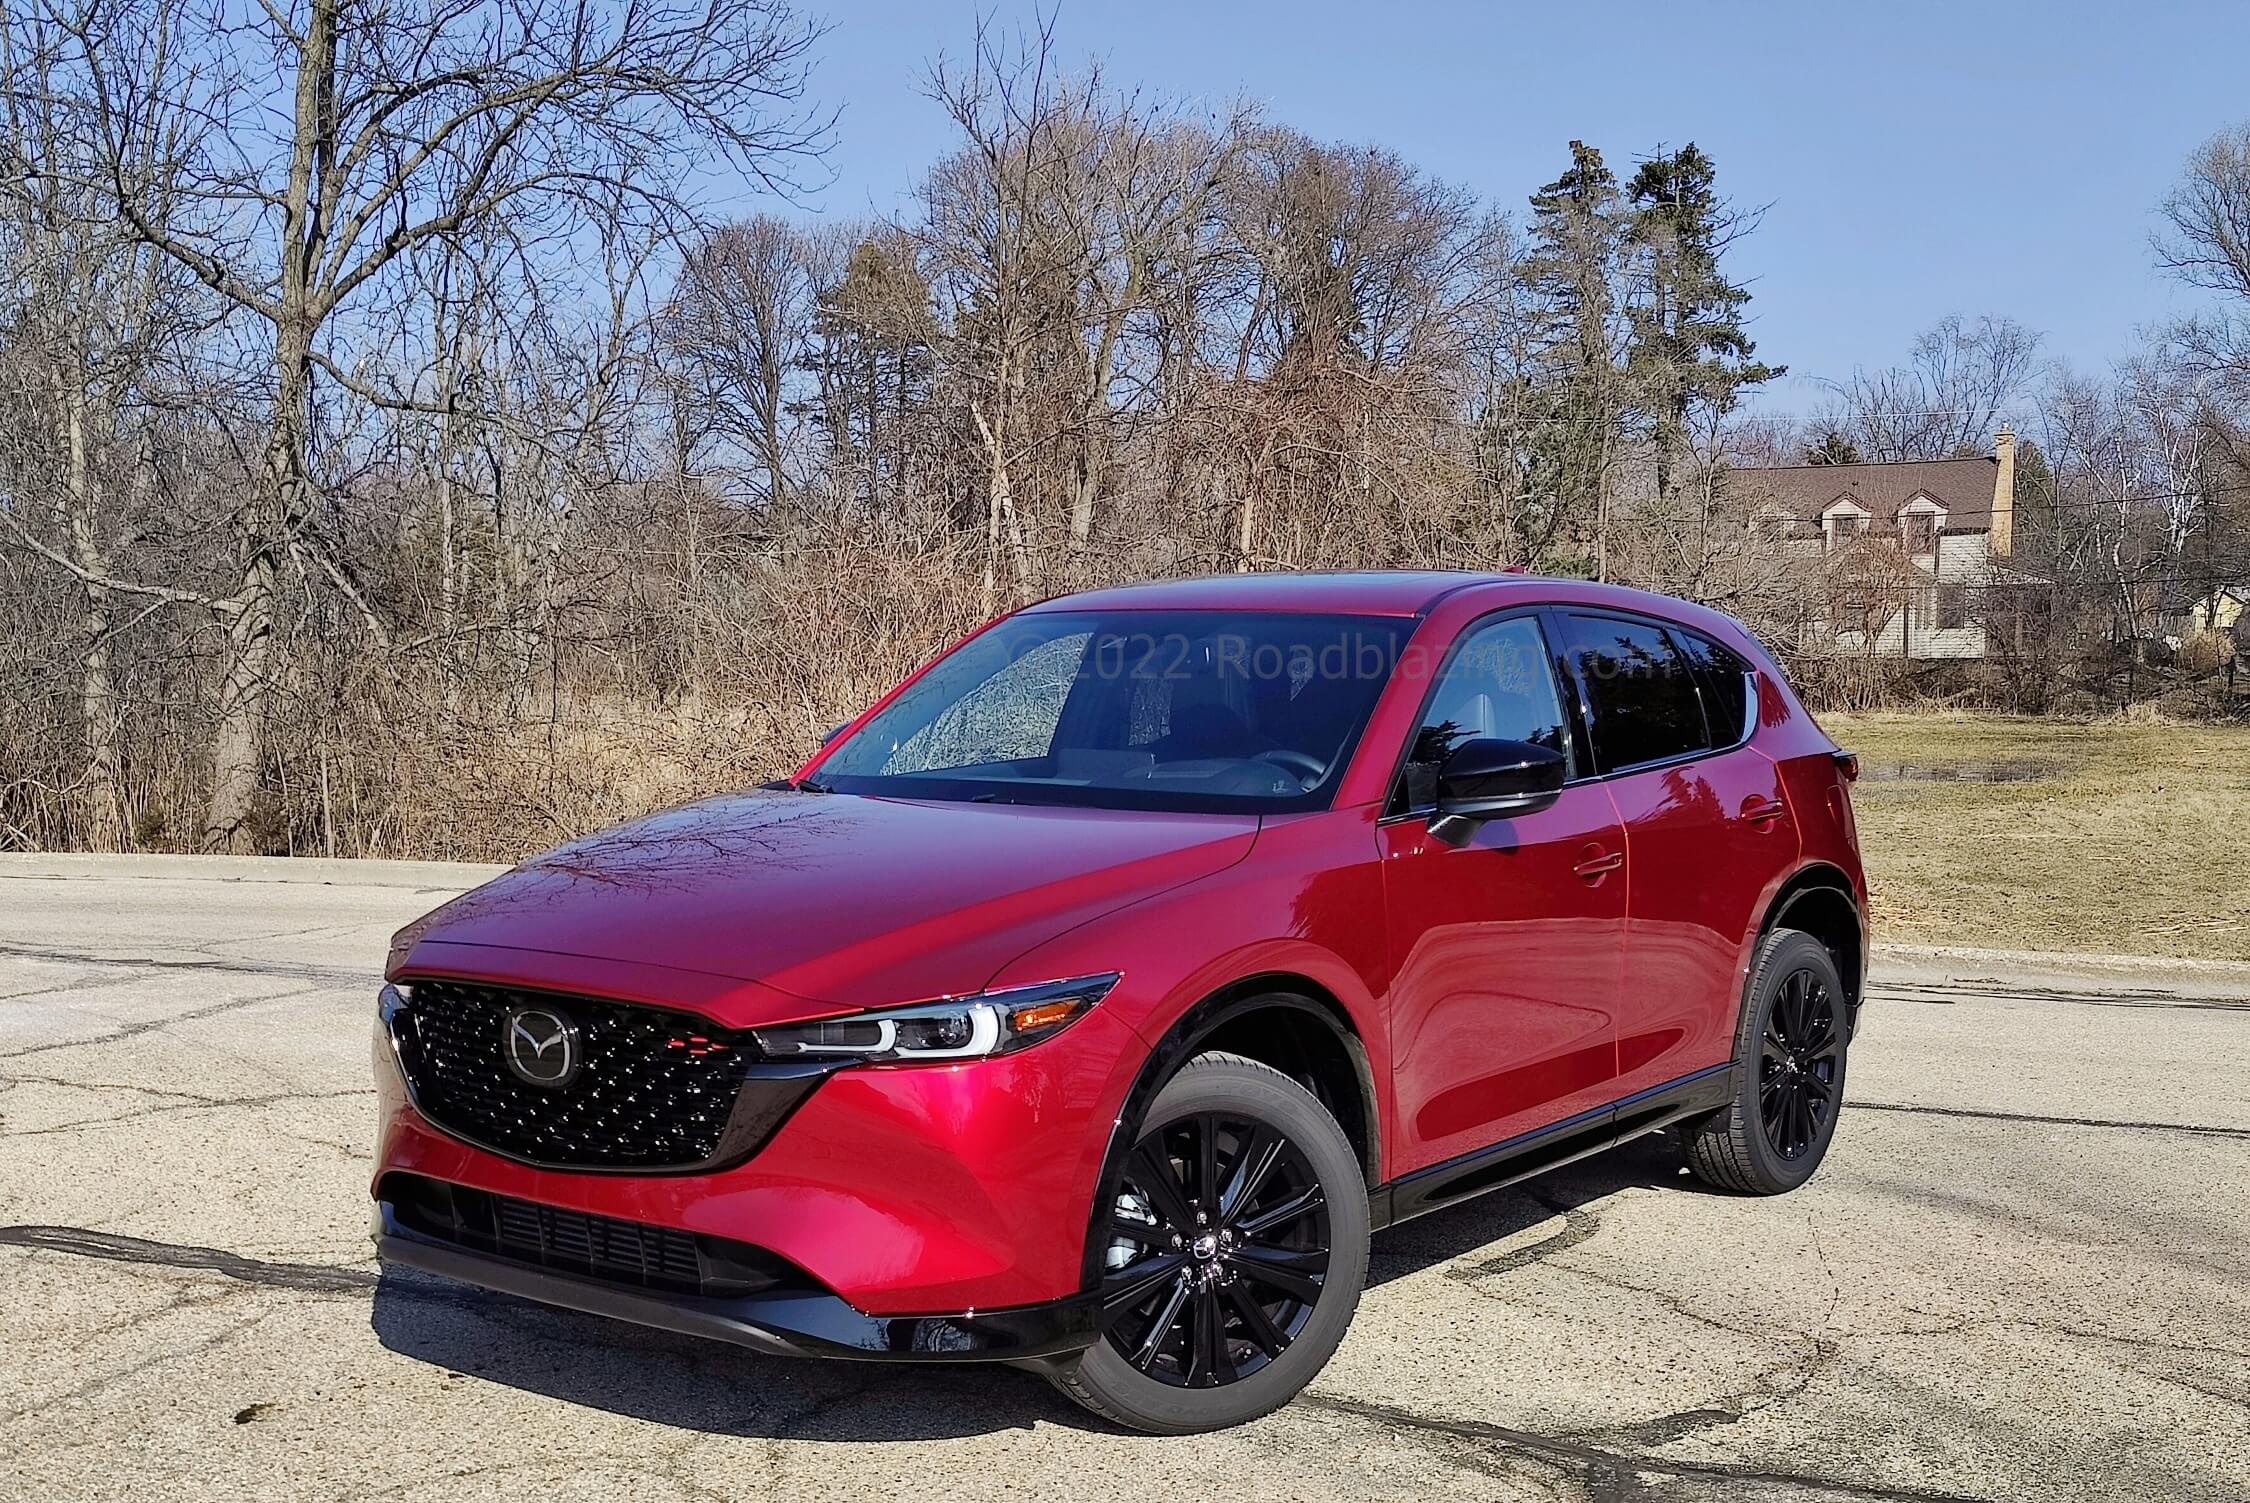 2022 Mazda CX-5 Turbo – Sharper, Smoother Re-Driven Review | RoadBlazing